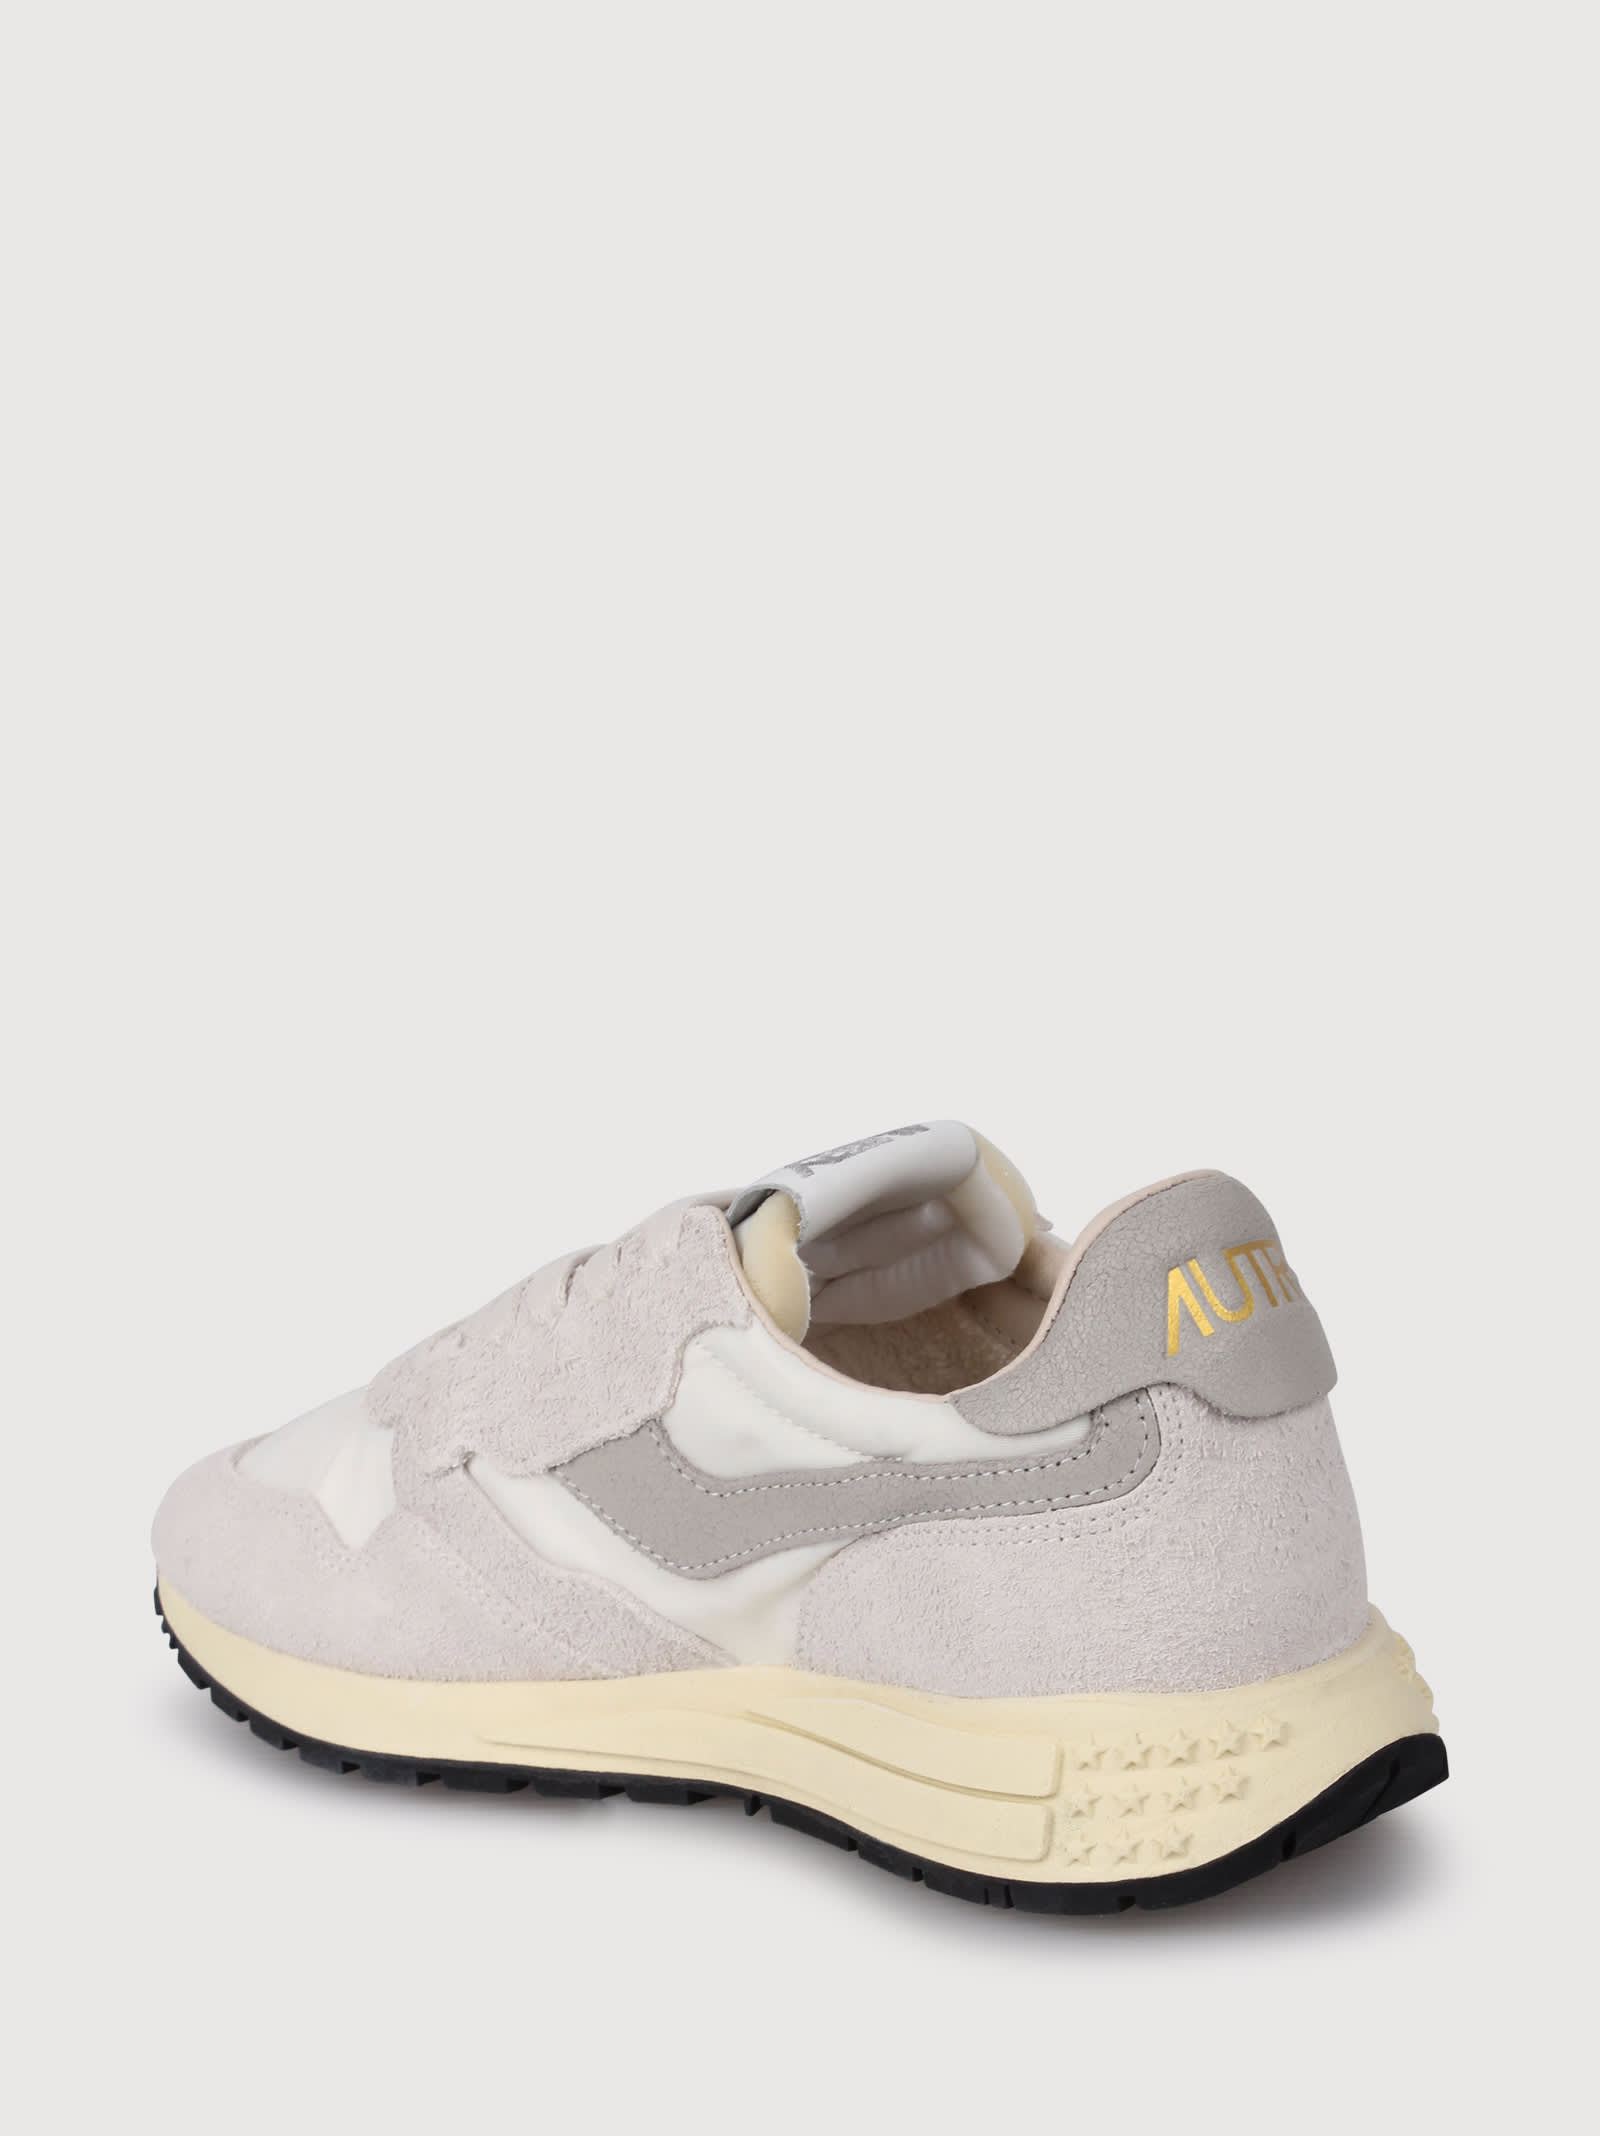 Shop Autry Reelwind Panelled Suede Sneakers